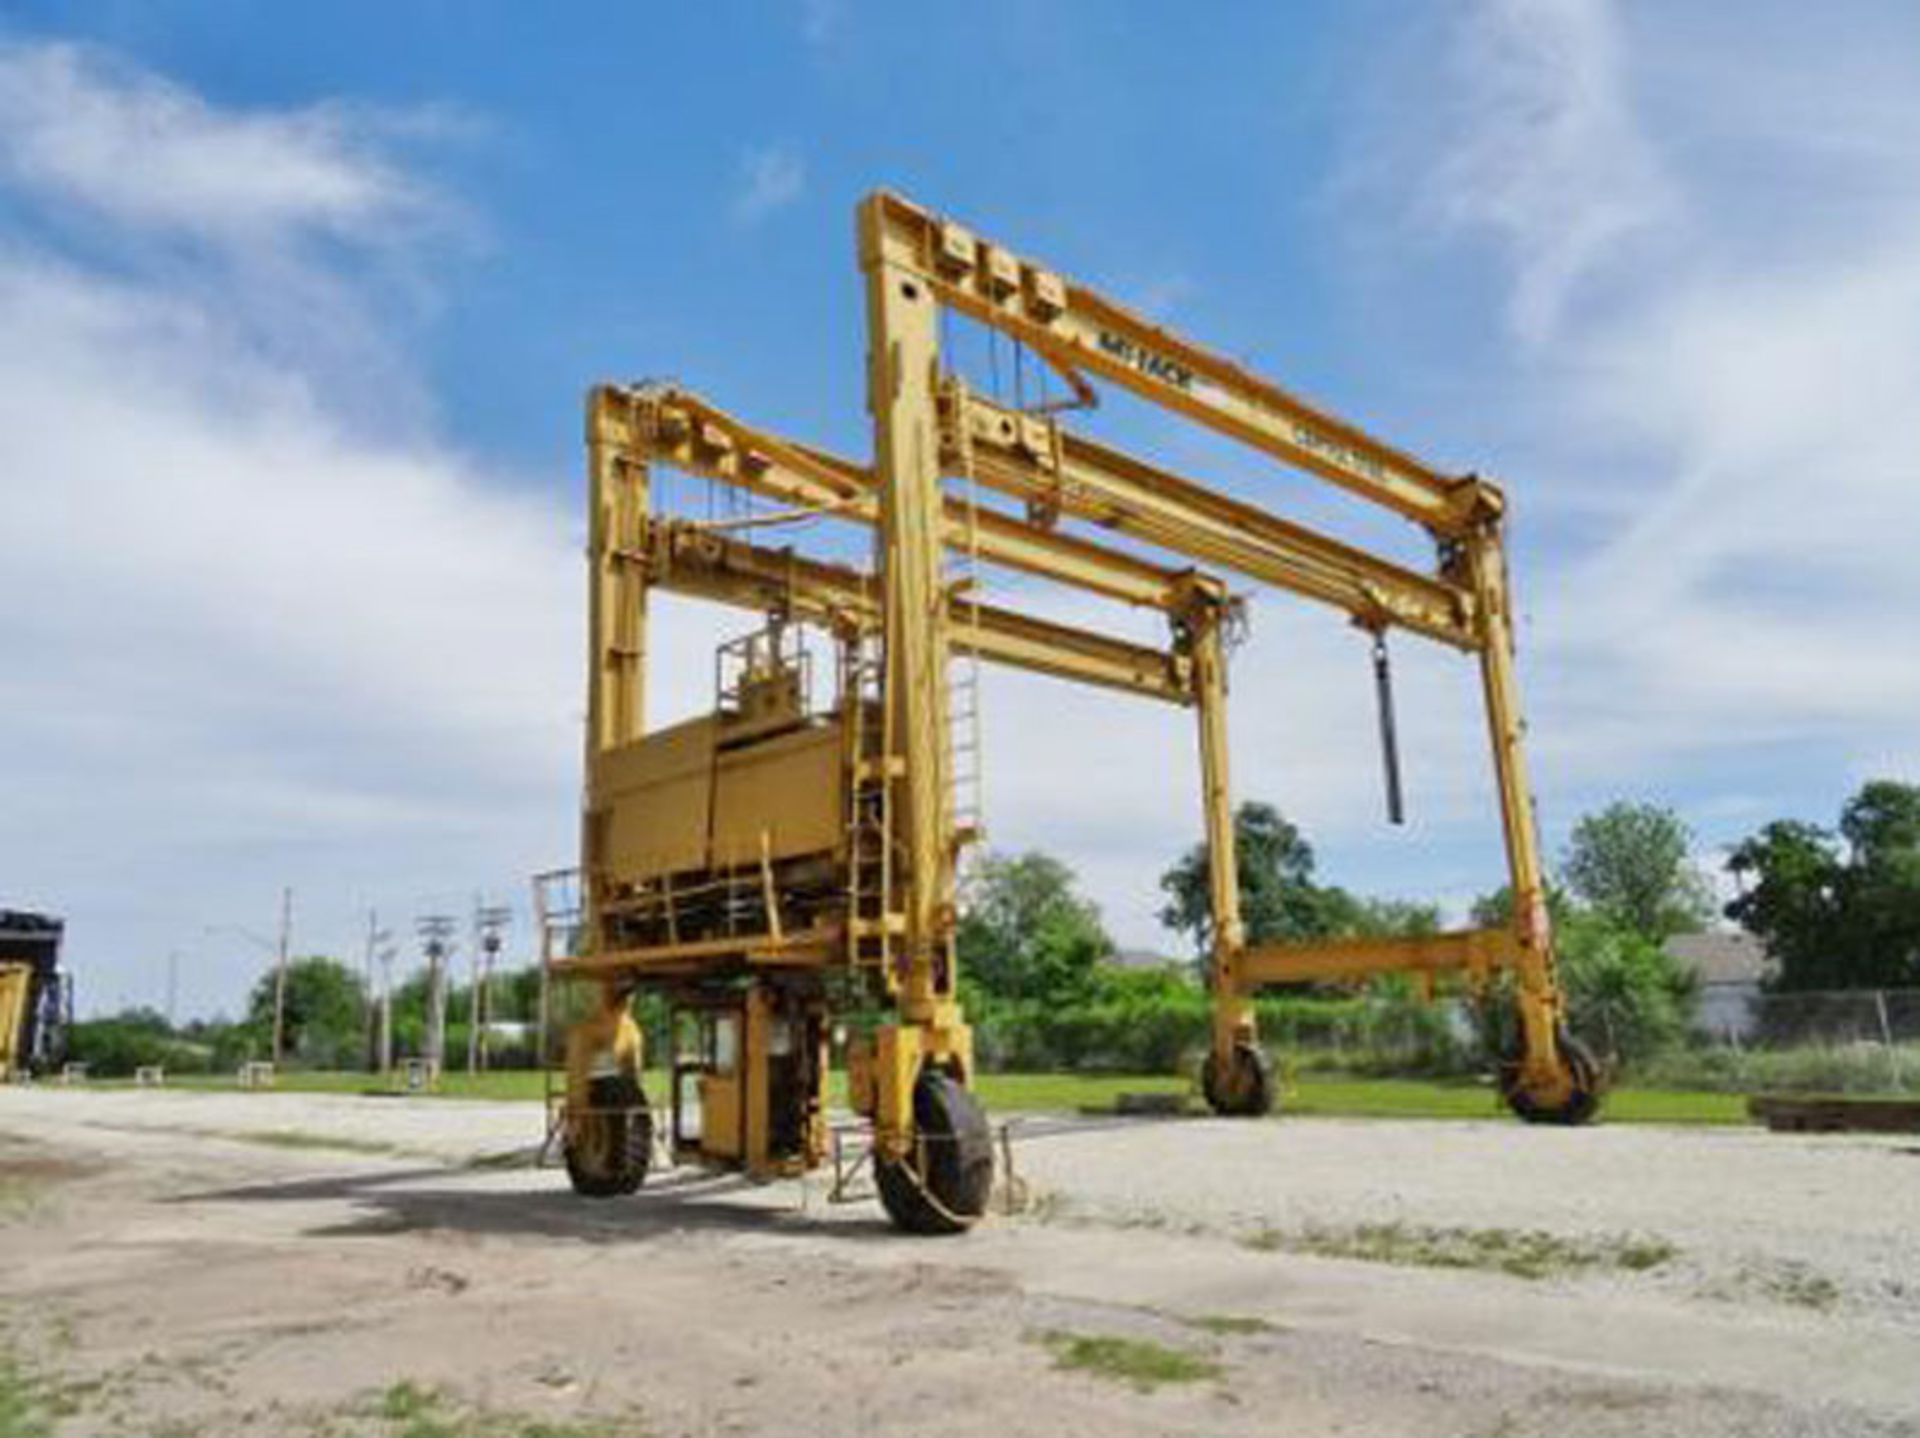 Drott Straddle Mobile Gantry Crane, 40 Ton x 42' 3", Mdl: Travelift 800, S/N: 5032 (Located In